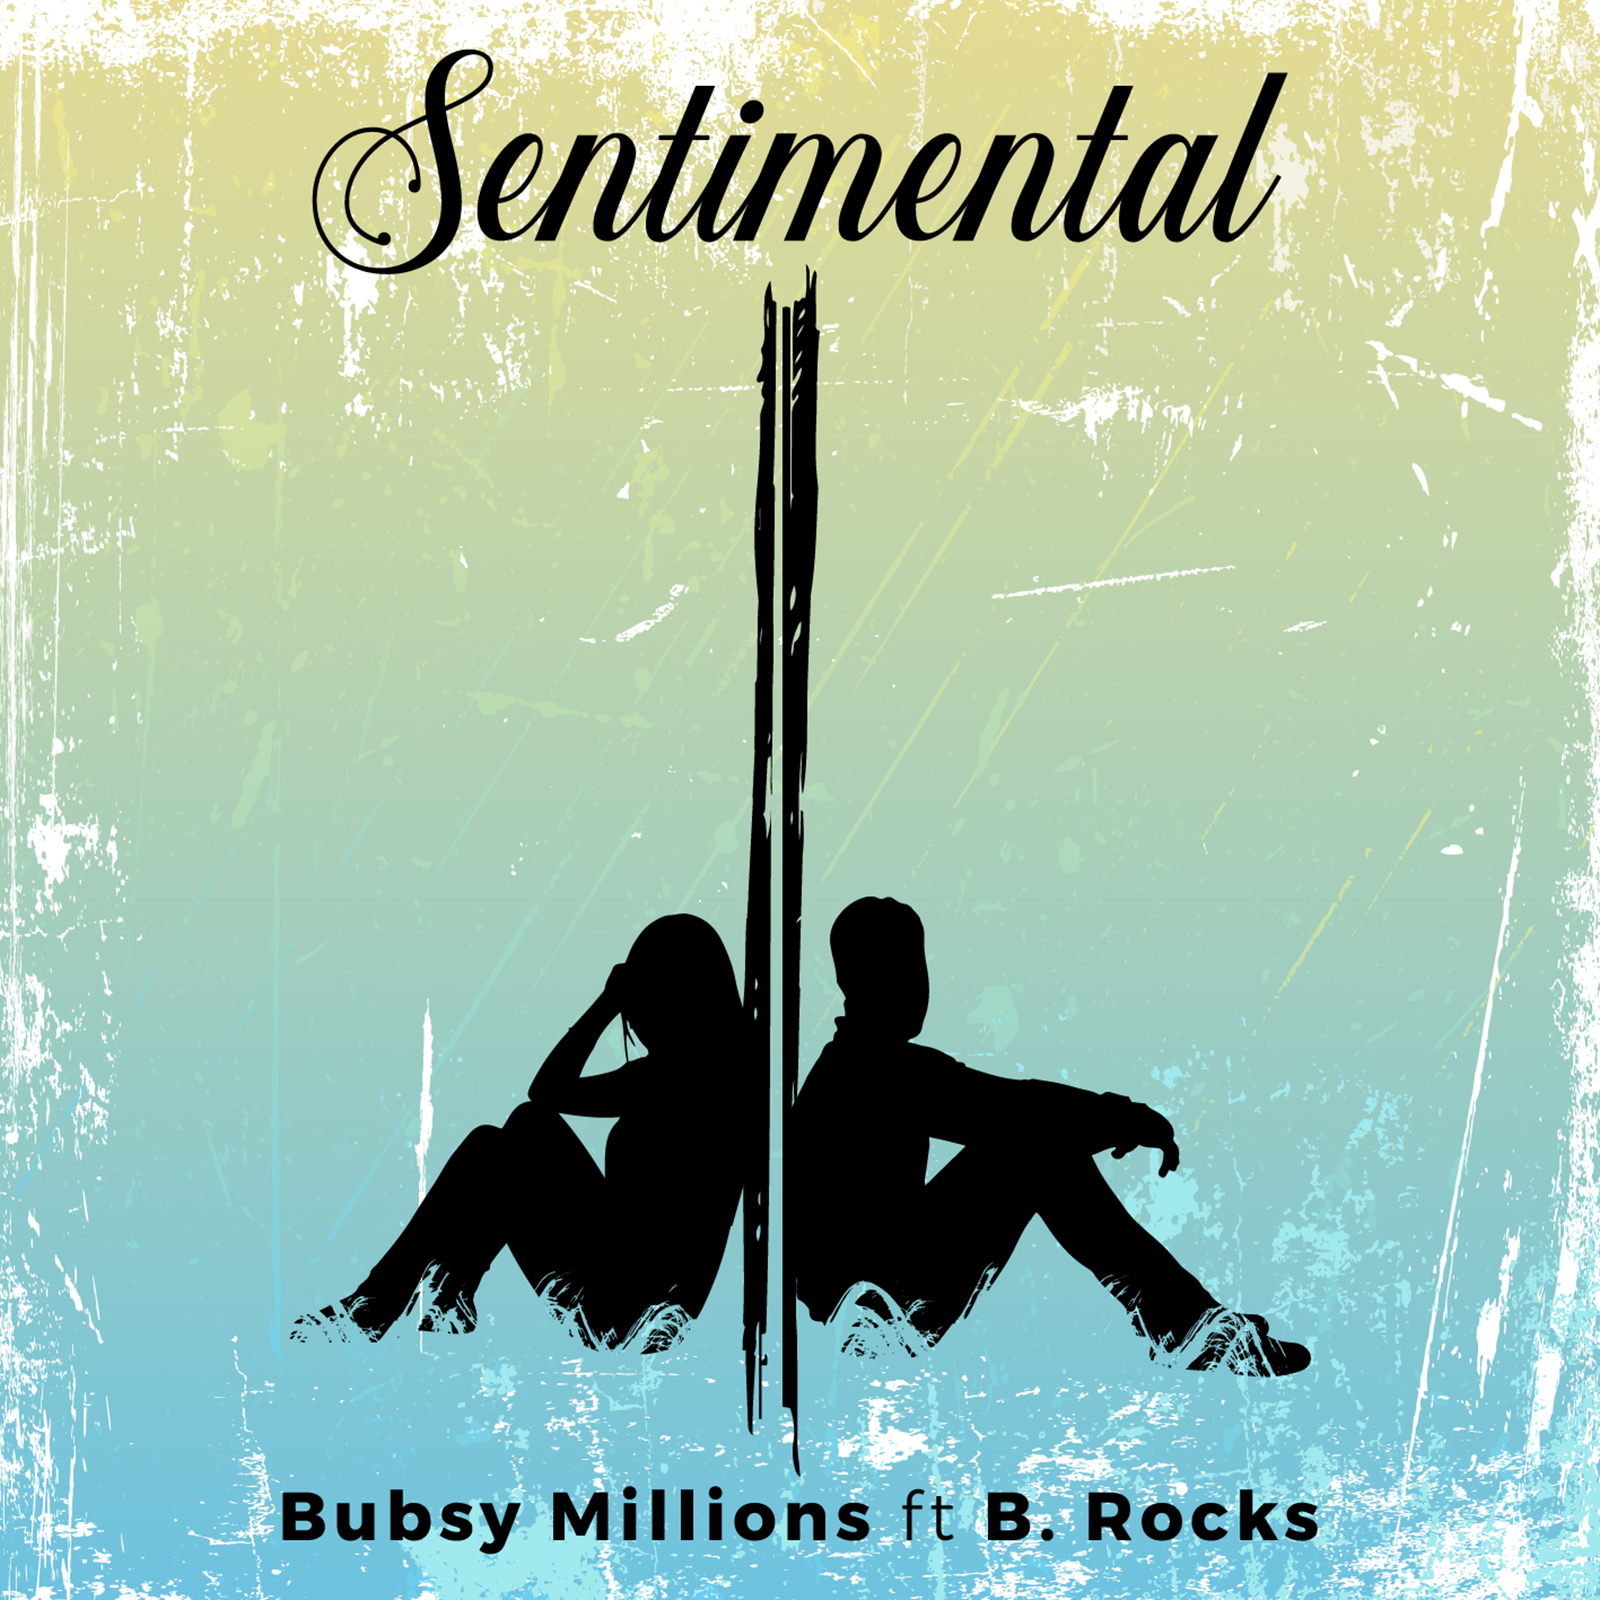 When you find the right woman, she is the only one who can get you “Sentimental”. @bubsymillions